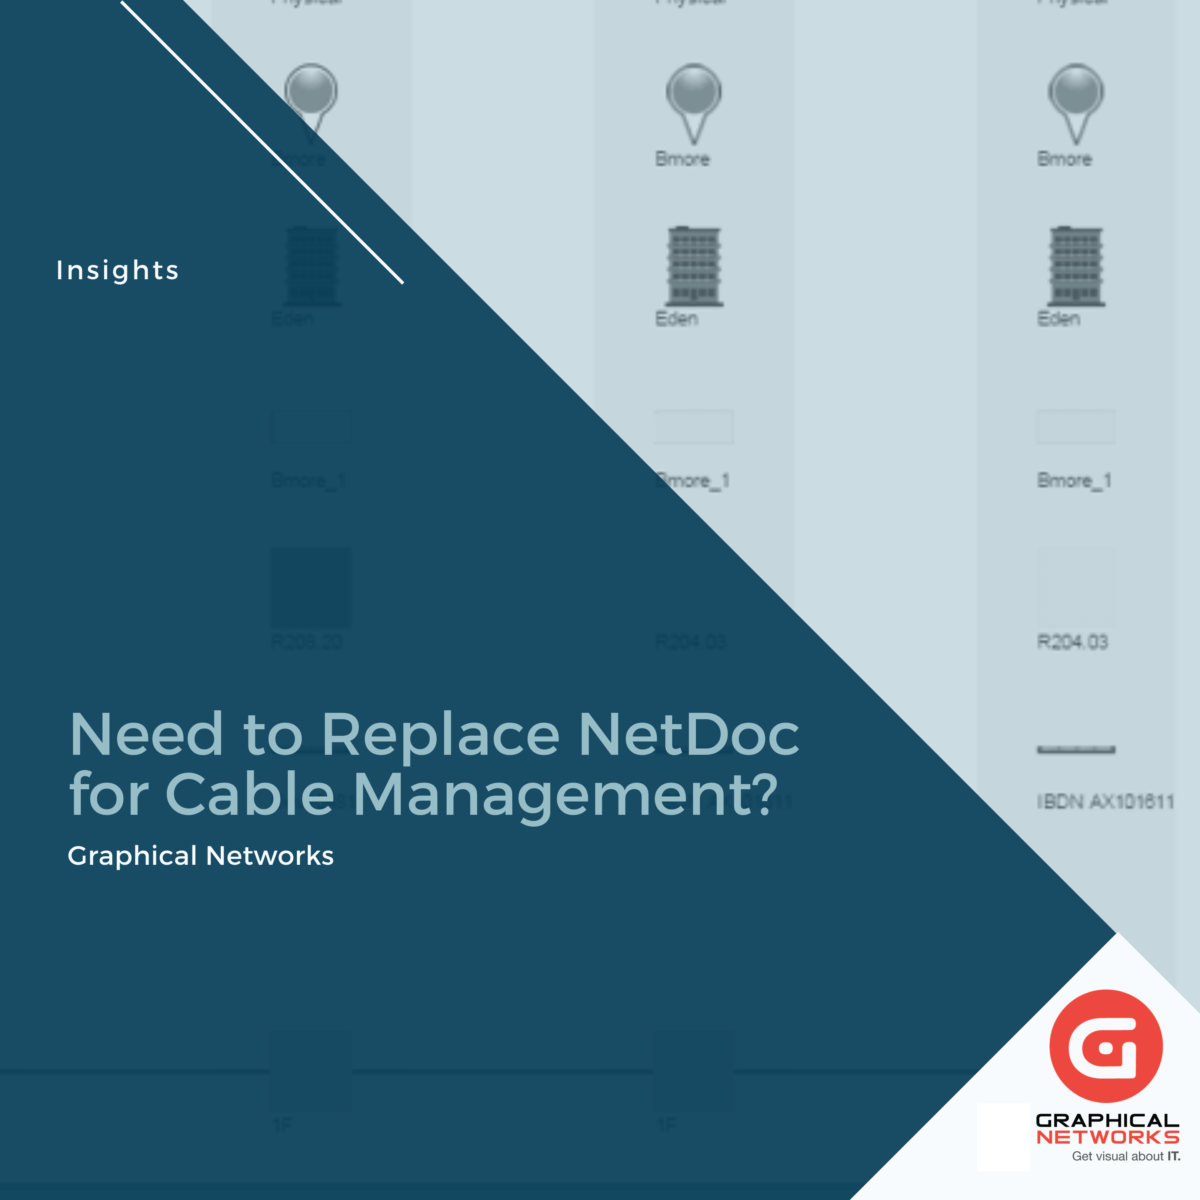 Need to Replace NetDoc for Cable Management?